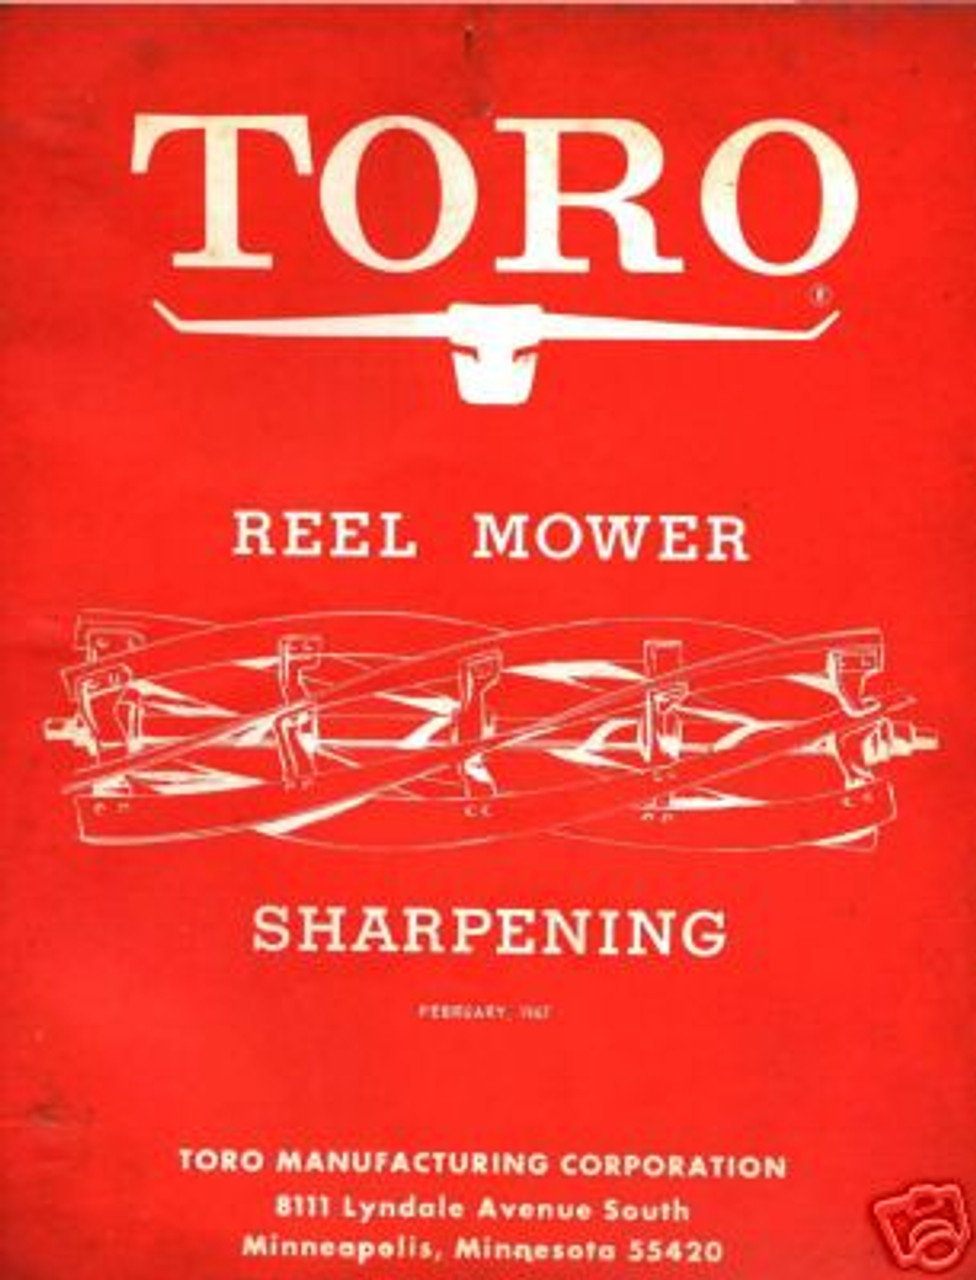 Toro reel mower sharpening factory manual on a CD learn to